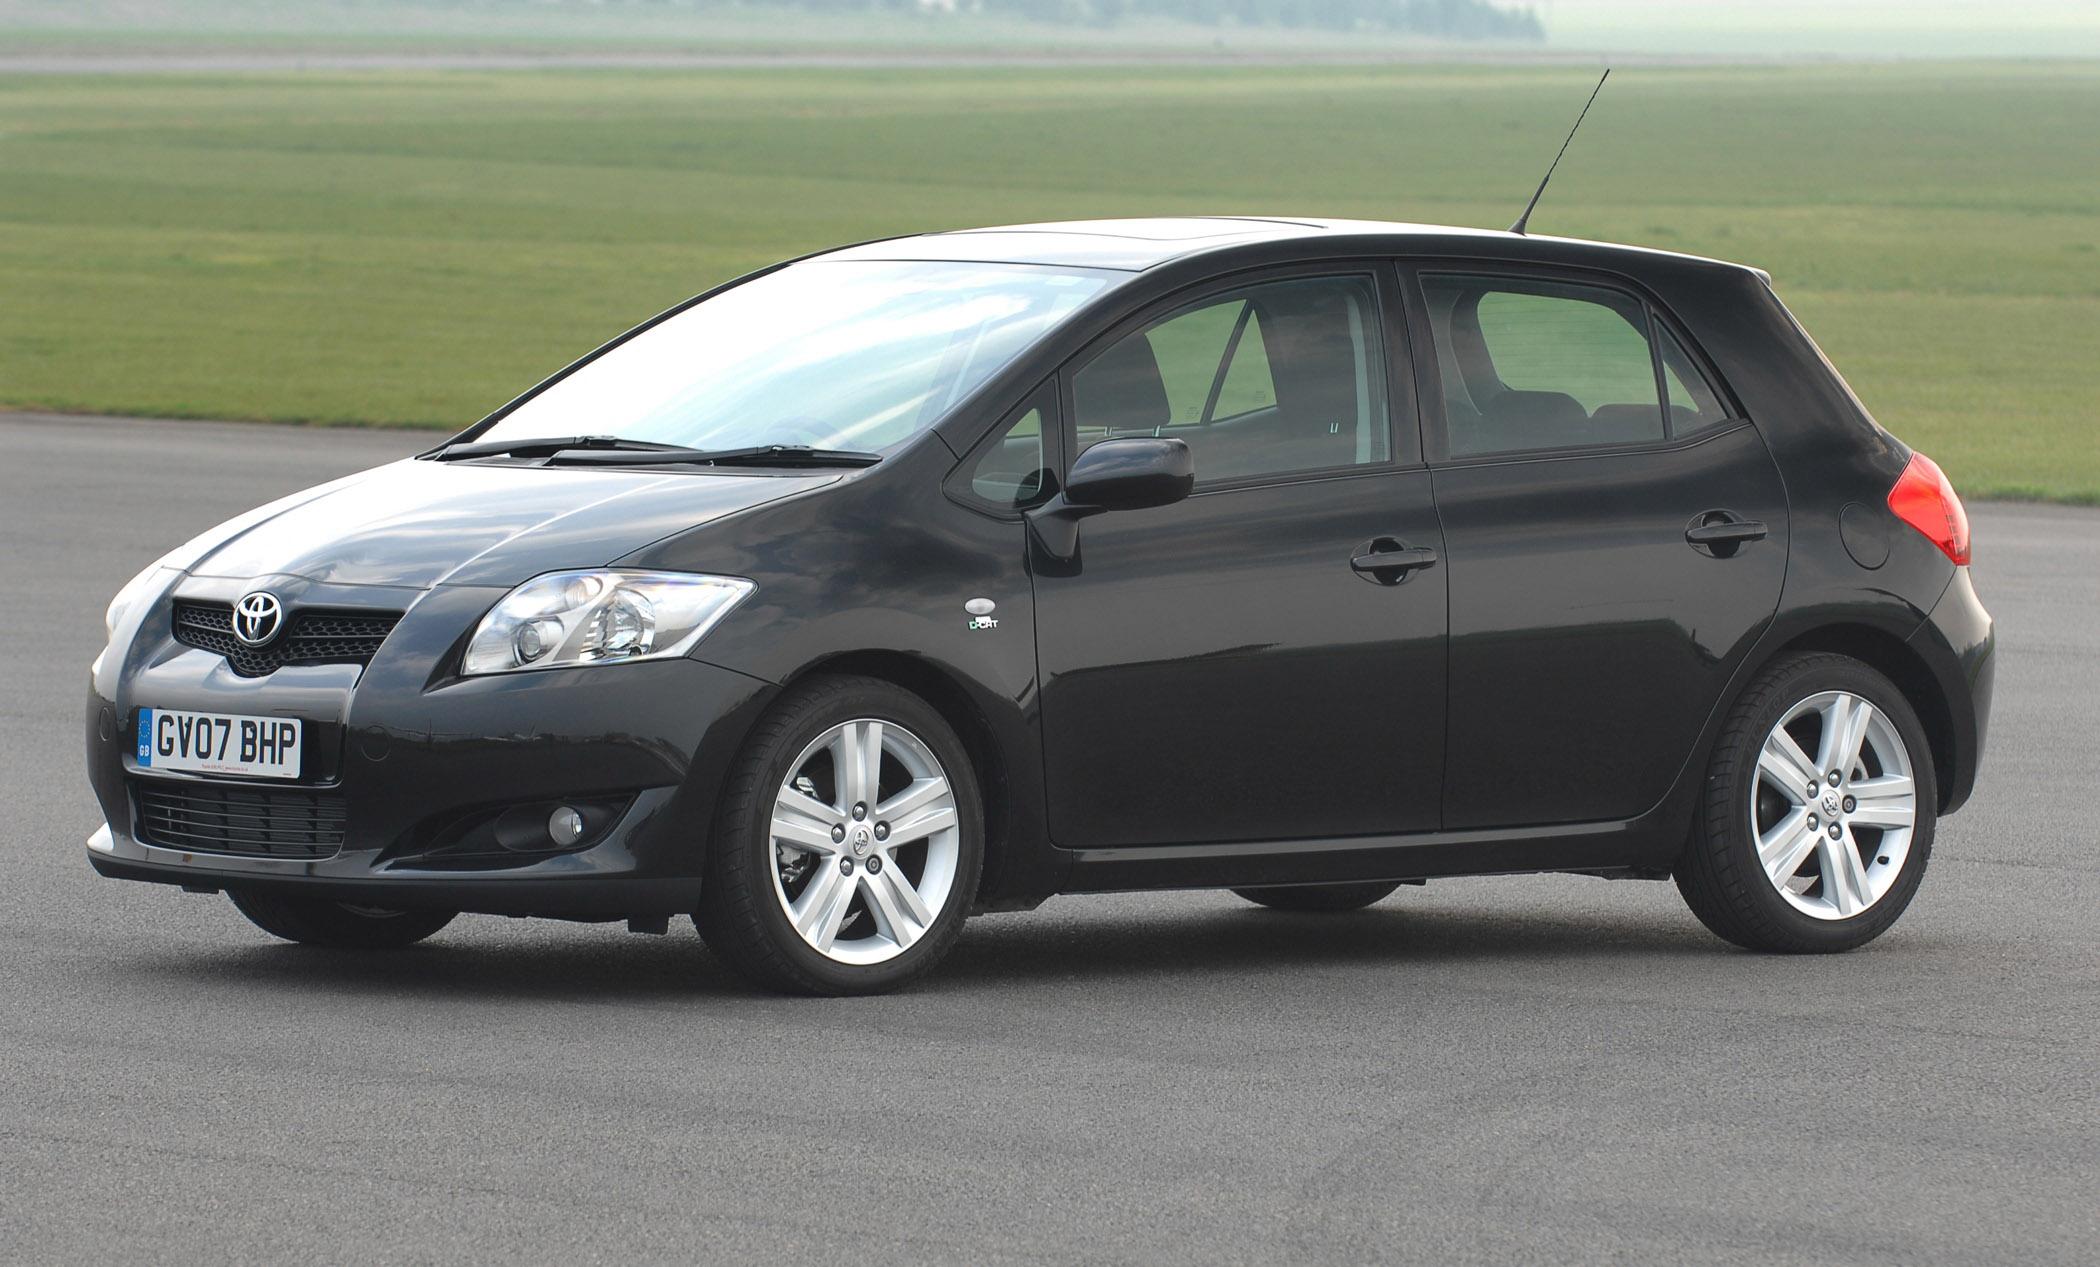 Toyota Auris T180 Picture Of